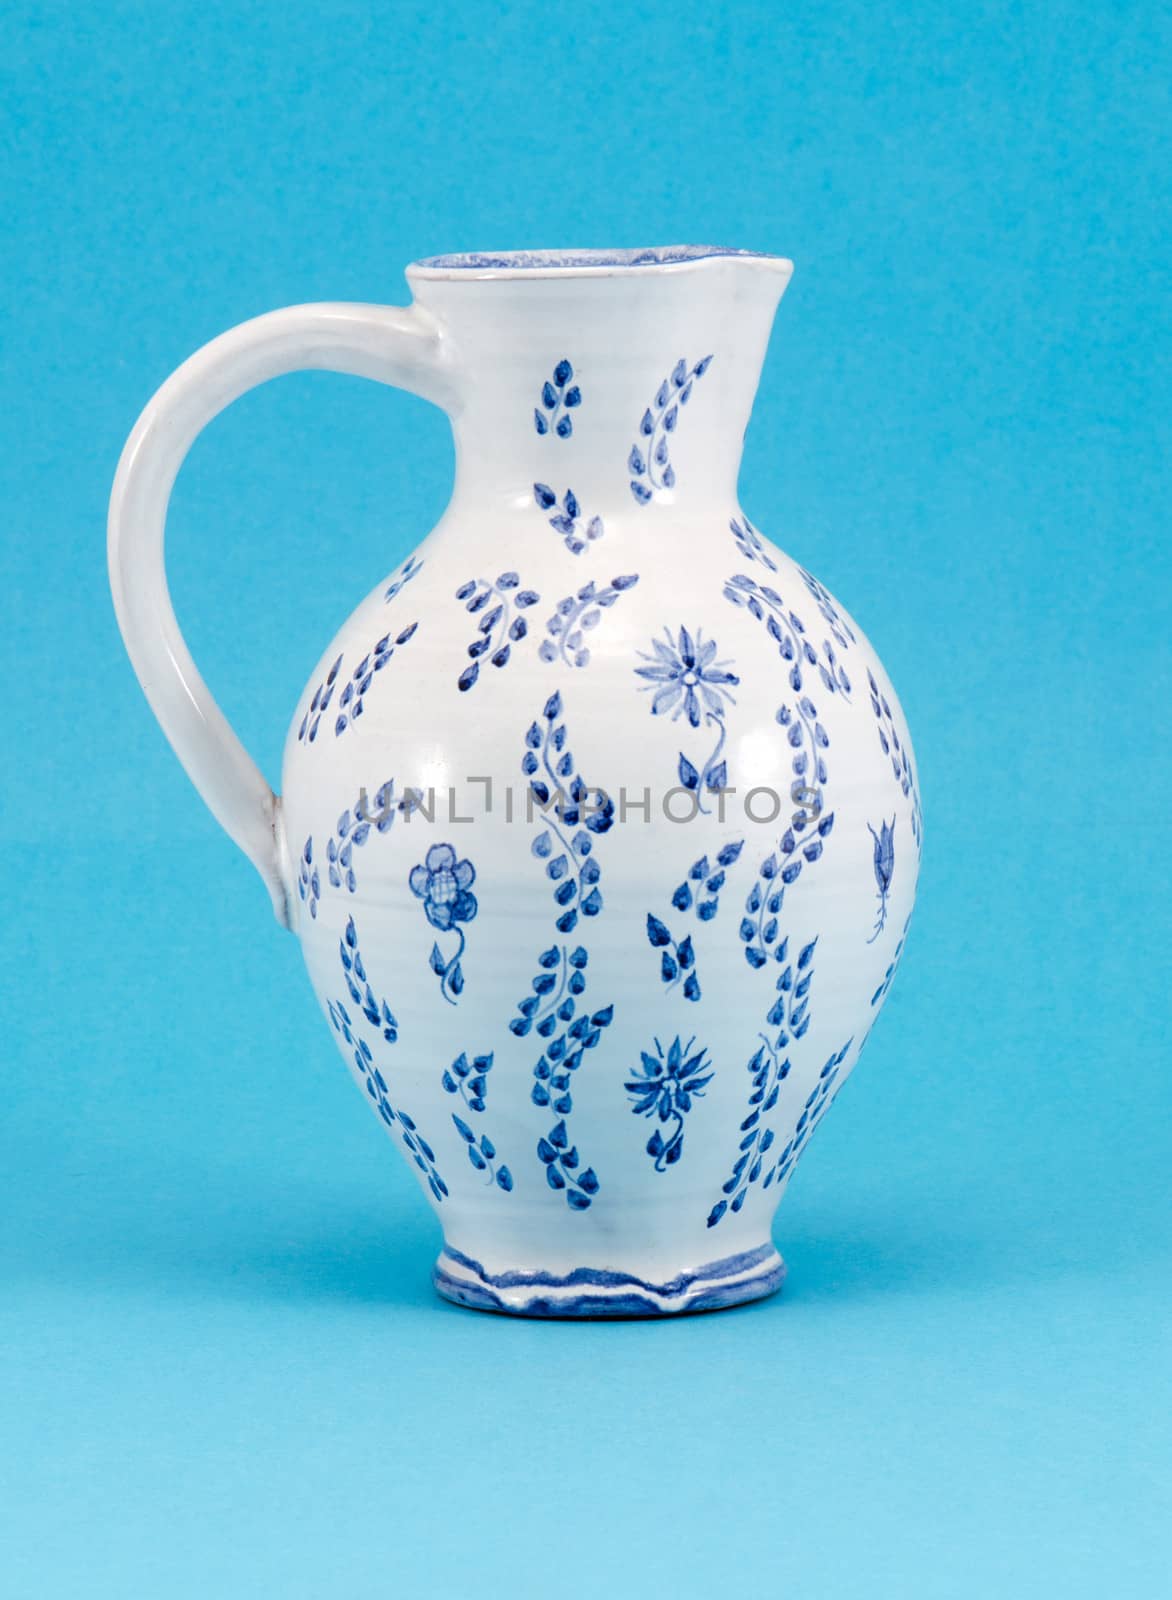 big hand made aged jug jar with art paint ornaments on blue background.